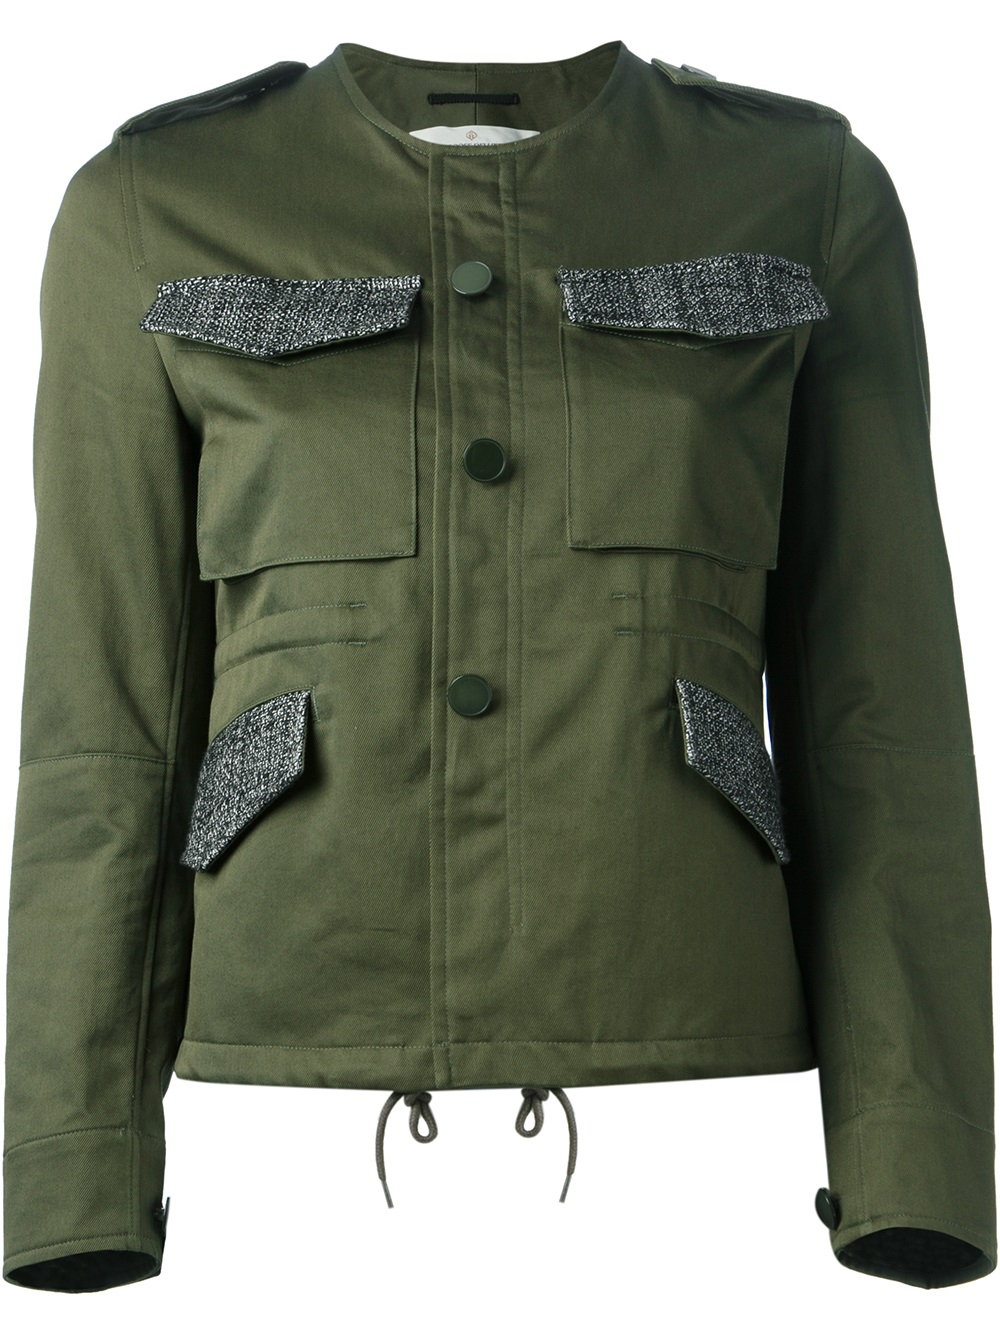 Lyst - Golden goose deluxe brand Cropped Military Jacket in Green